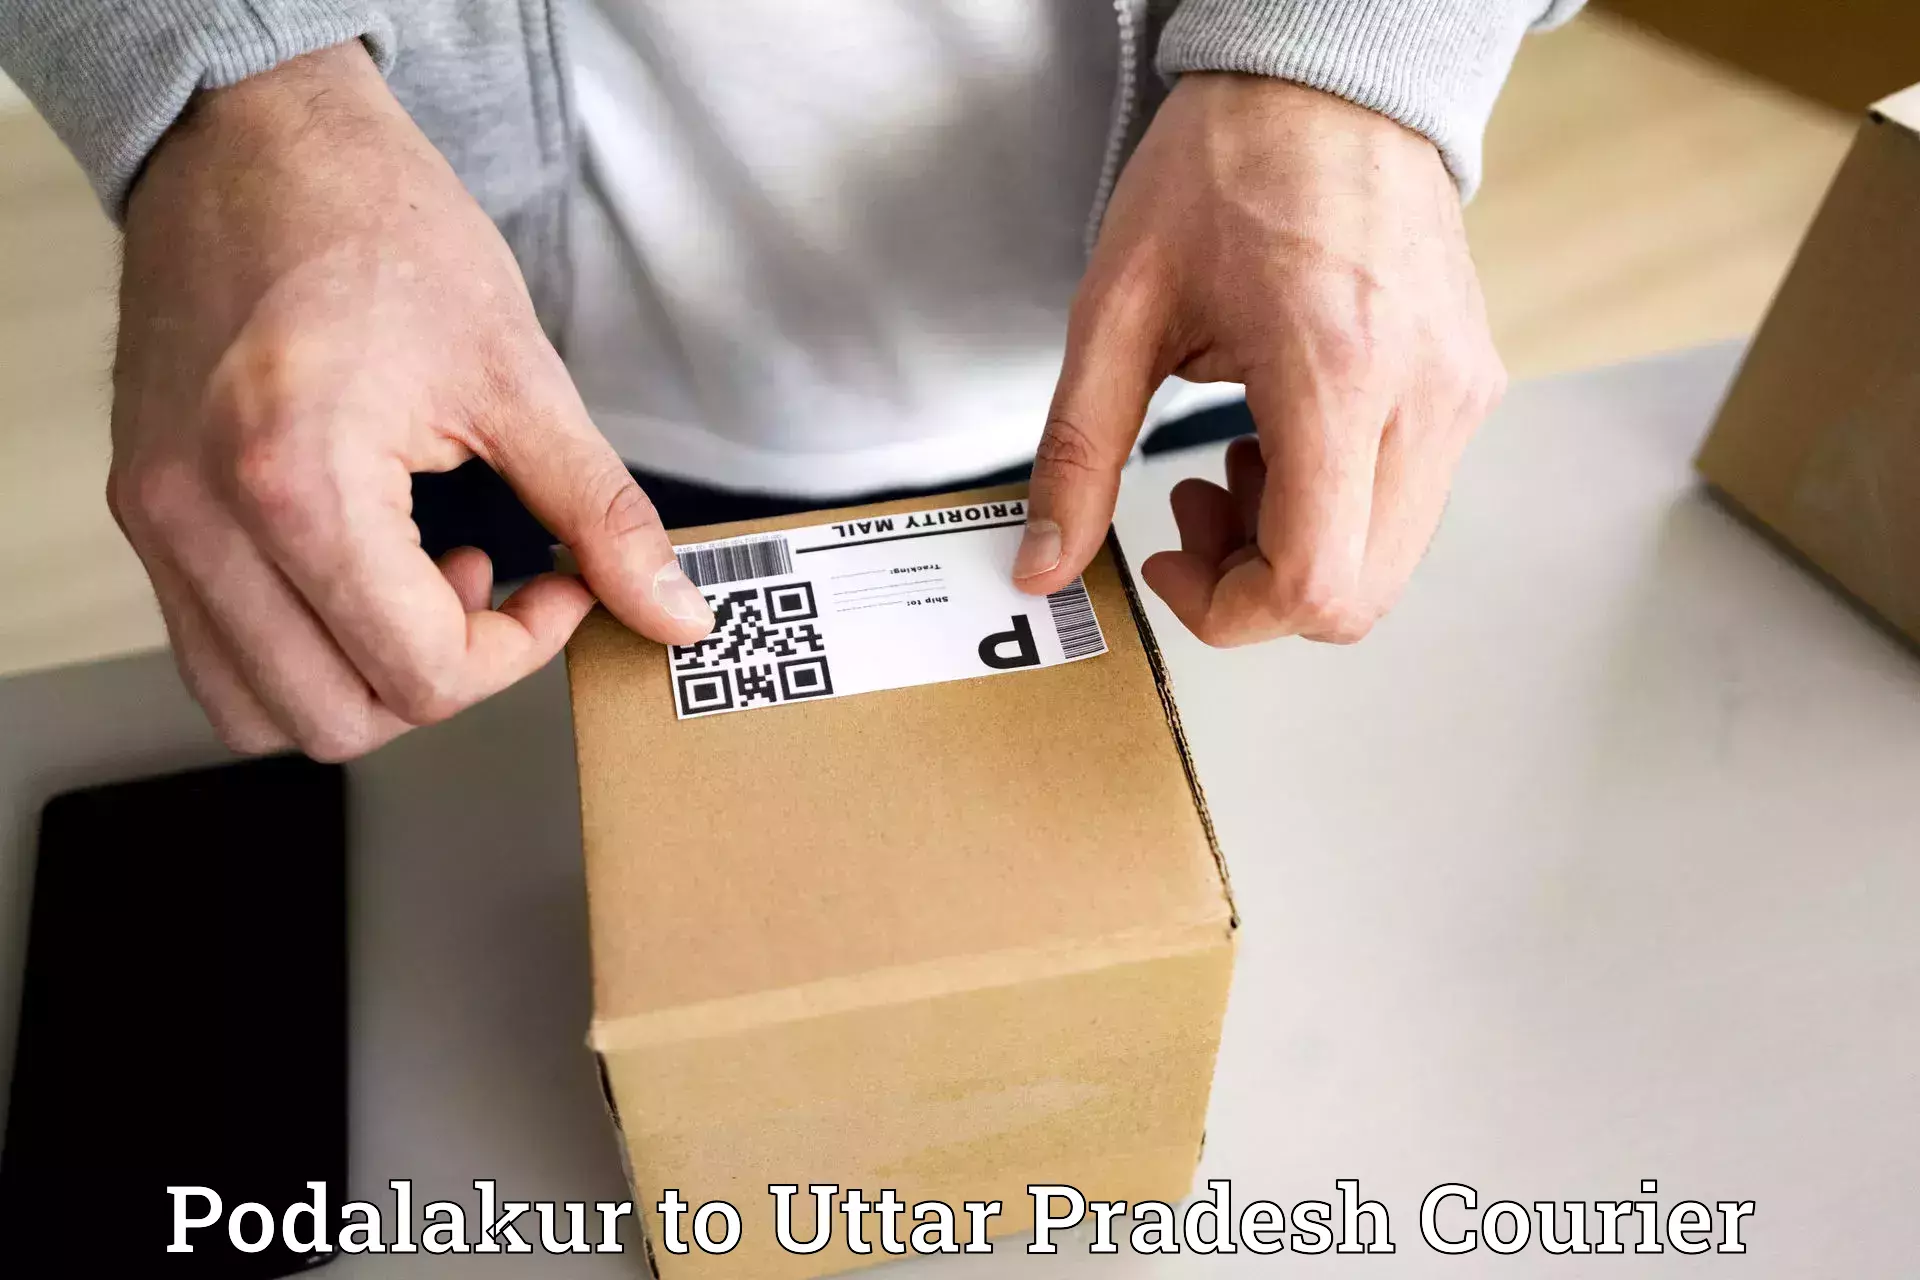 Cash on delivery service Podalakur to Chopan